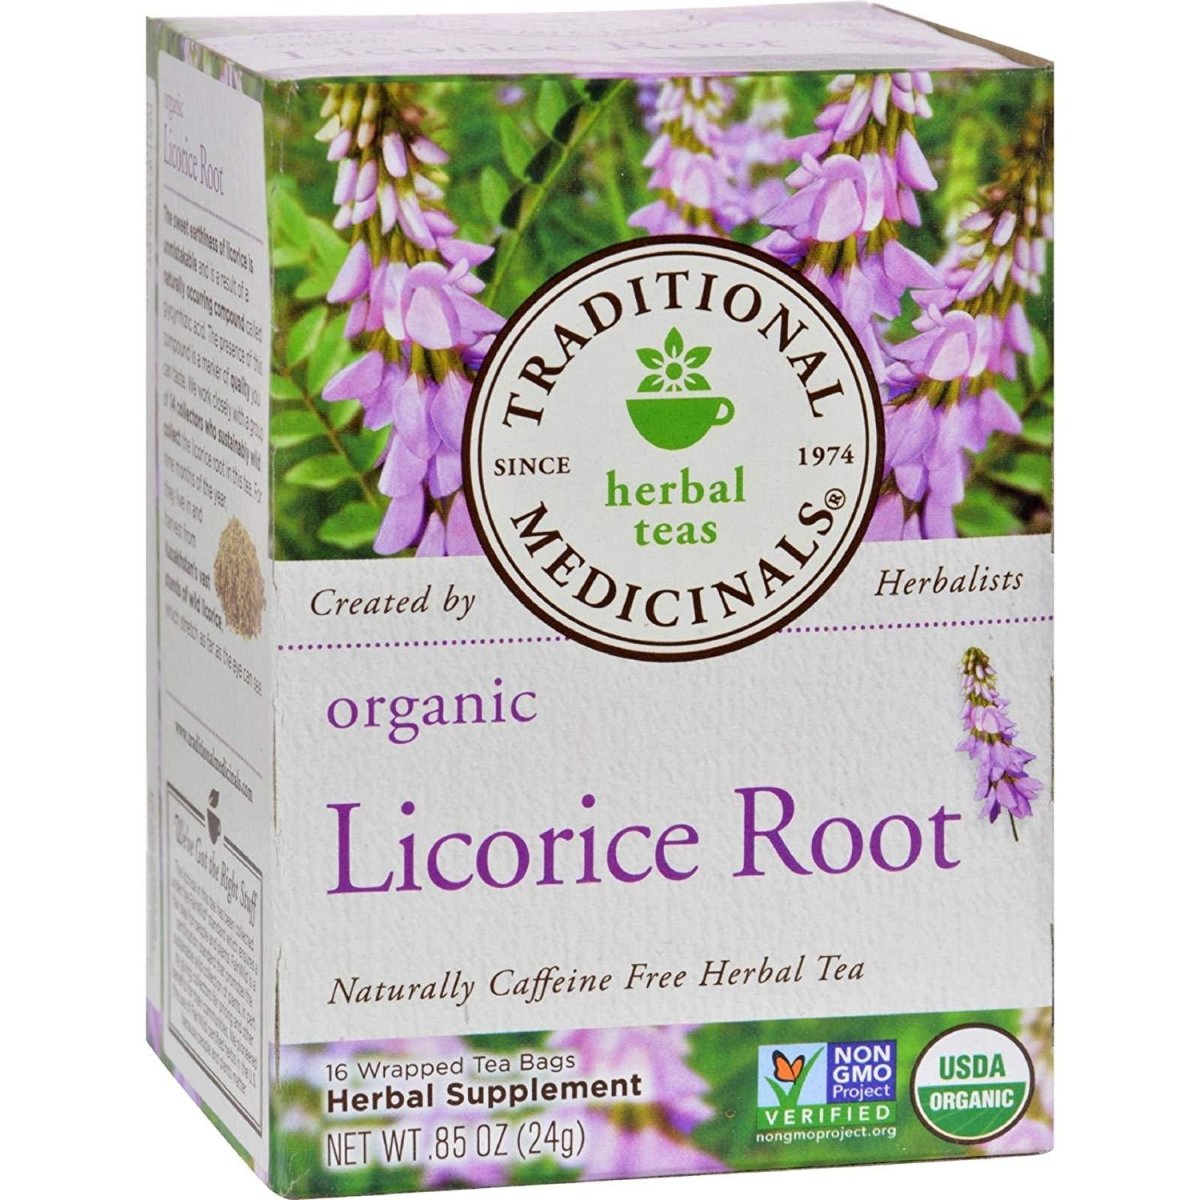 Traditional Medicinals Caffeine Free Herbal Tea Bags Organic Licorice Root  